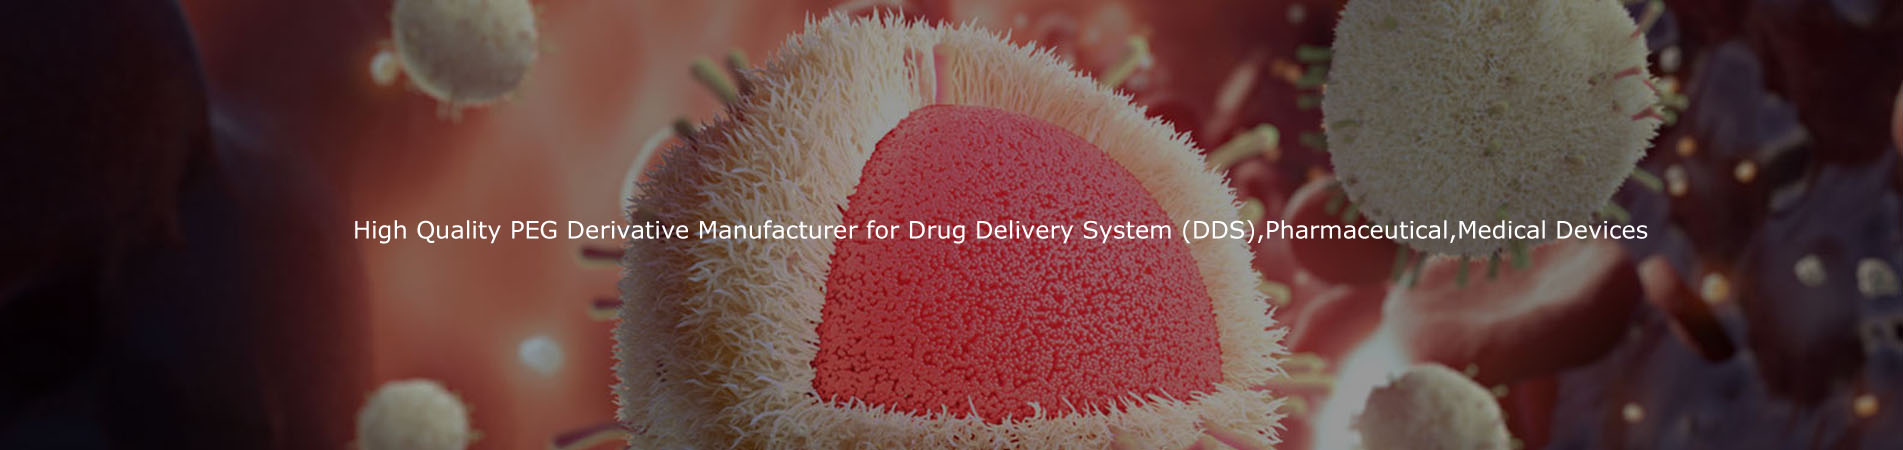 High Quality PEG Derivative Manufacturer for Drug Delivery System (DDS),Pharmaceutical,Medical Devices